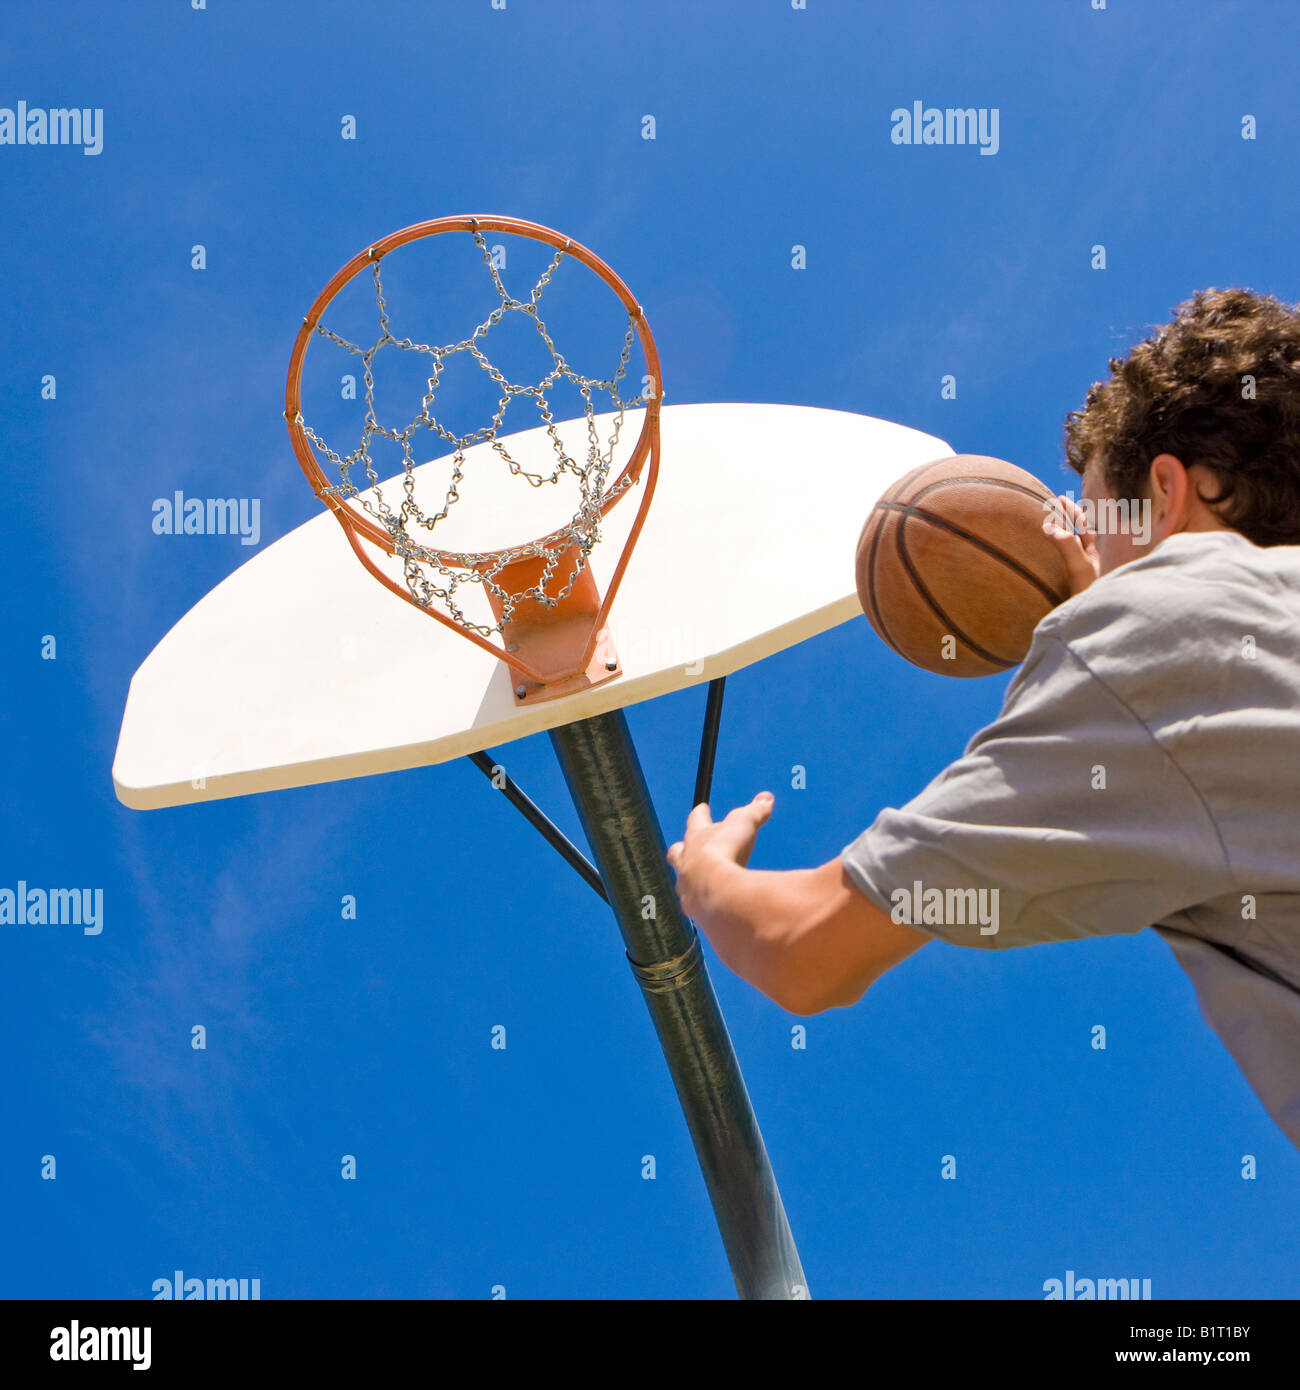 A teen basketball player jumps to shoot at the basket Stock Photo